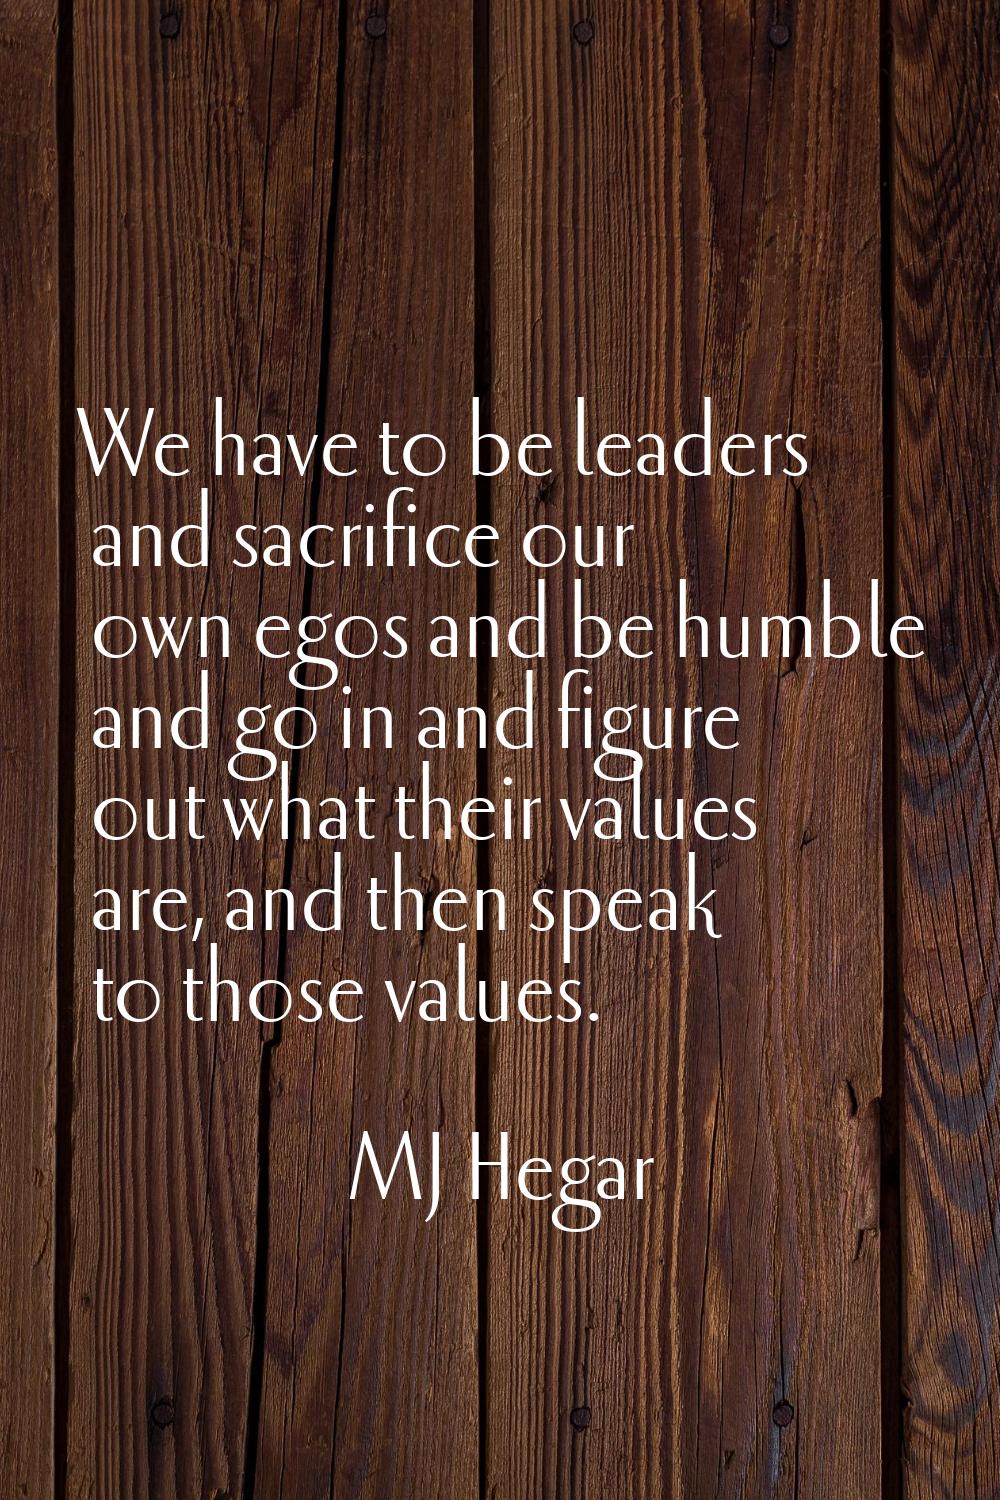 We have to be leaders and sacrifice our own egos and be humble and go in and figure out what their 